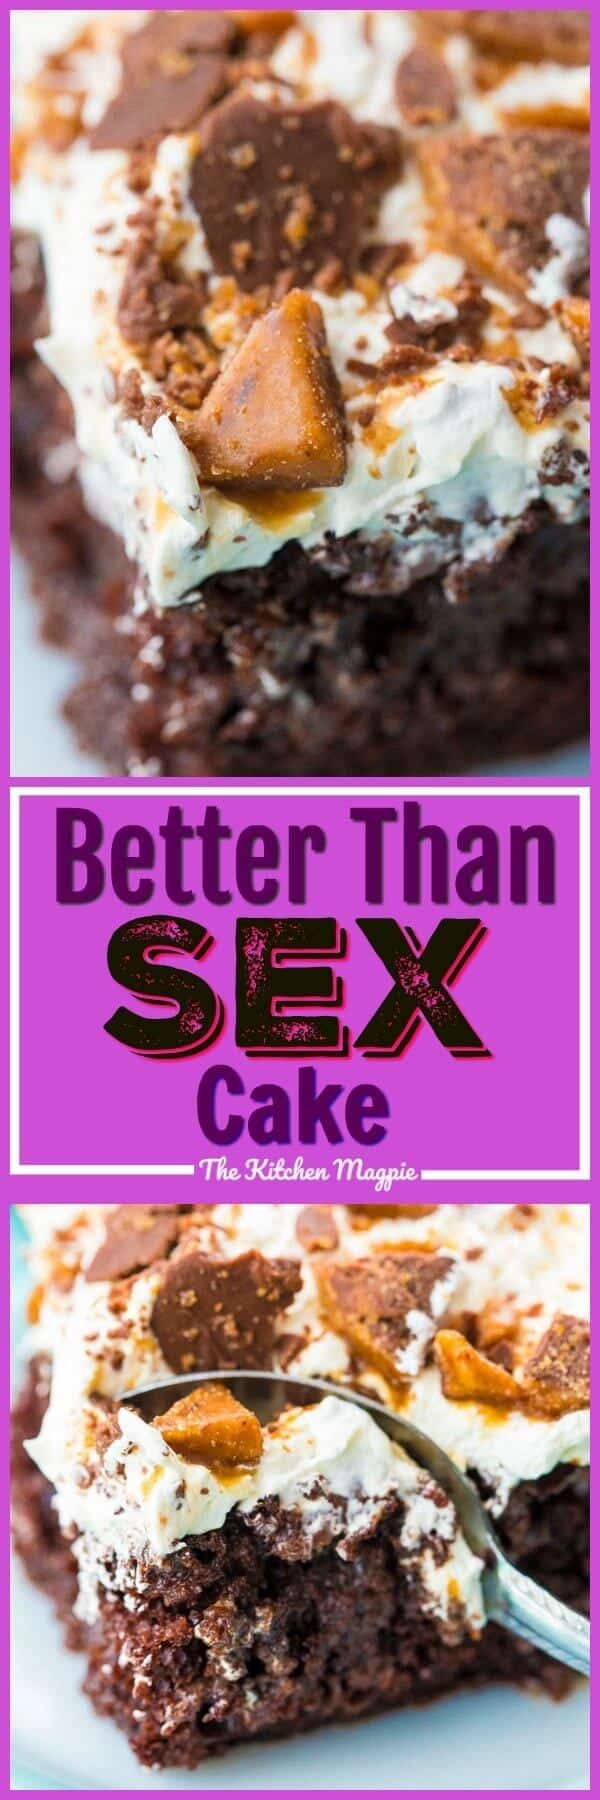 While the name may be risque, the actual Better Than Sex Cake is not! This cake has 5 ingredients, is easy to make and like the name indicates, it's pretty darn delicious! #cake #chocolate #cakemix #dessert #recipe